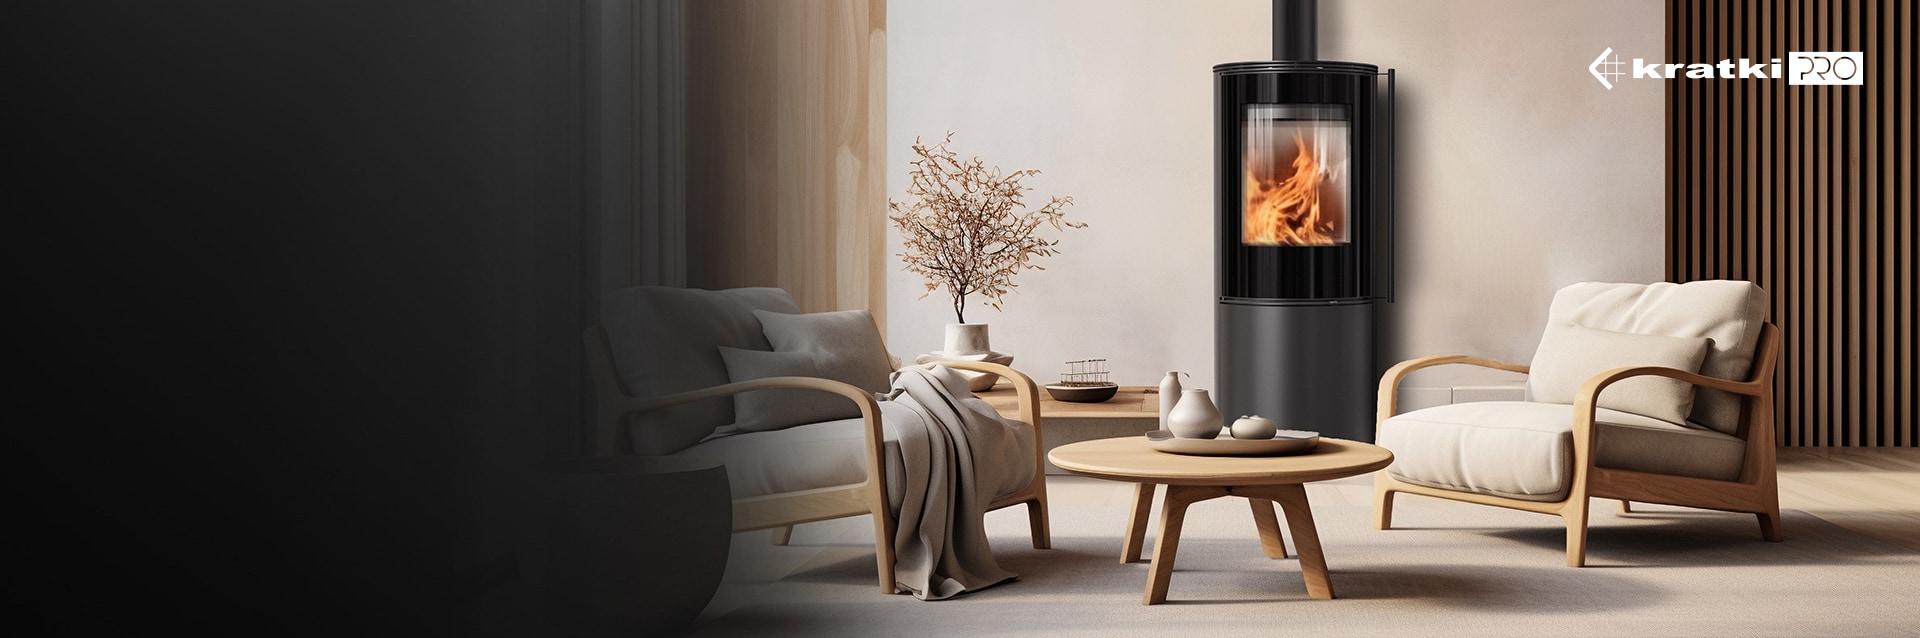 Meet the new PRO series wood burning stoves